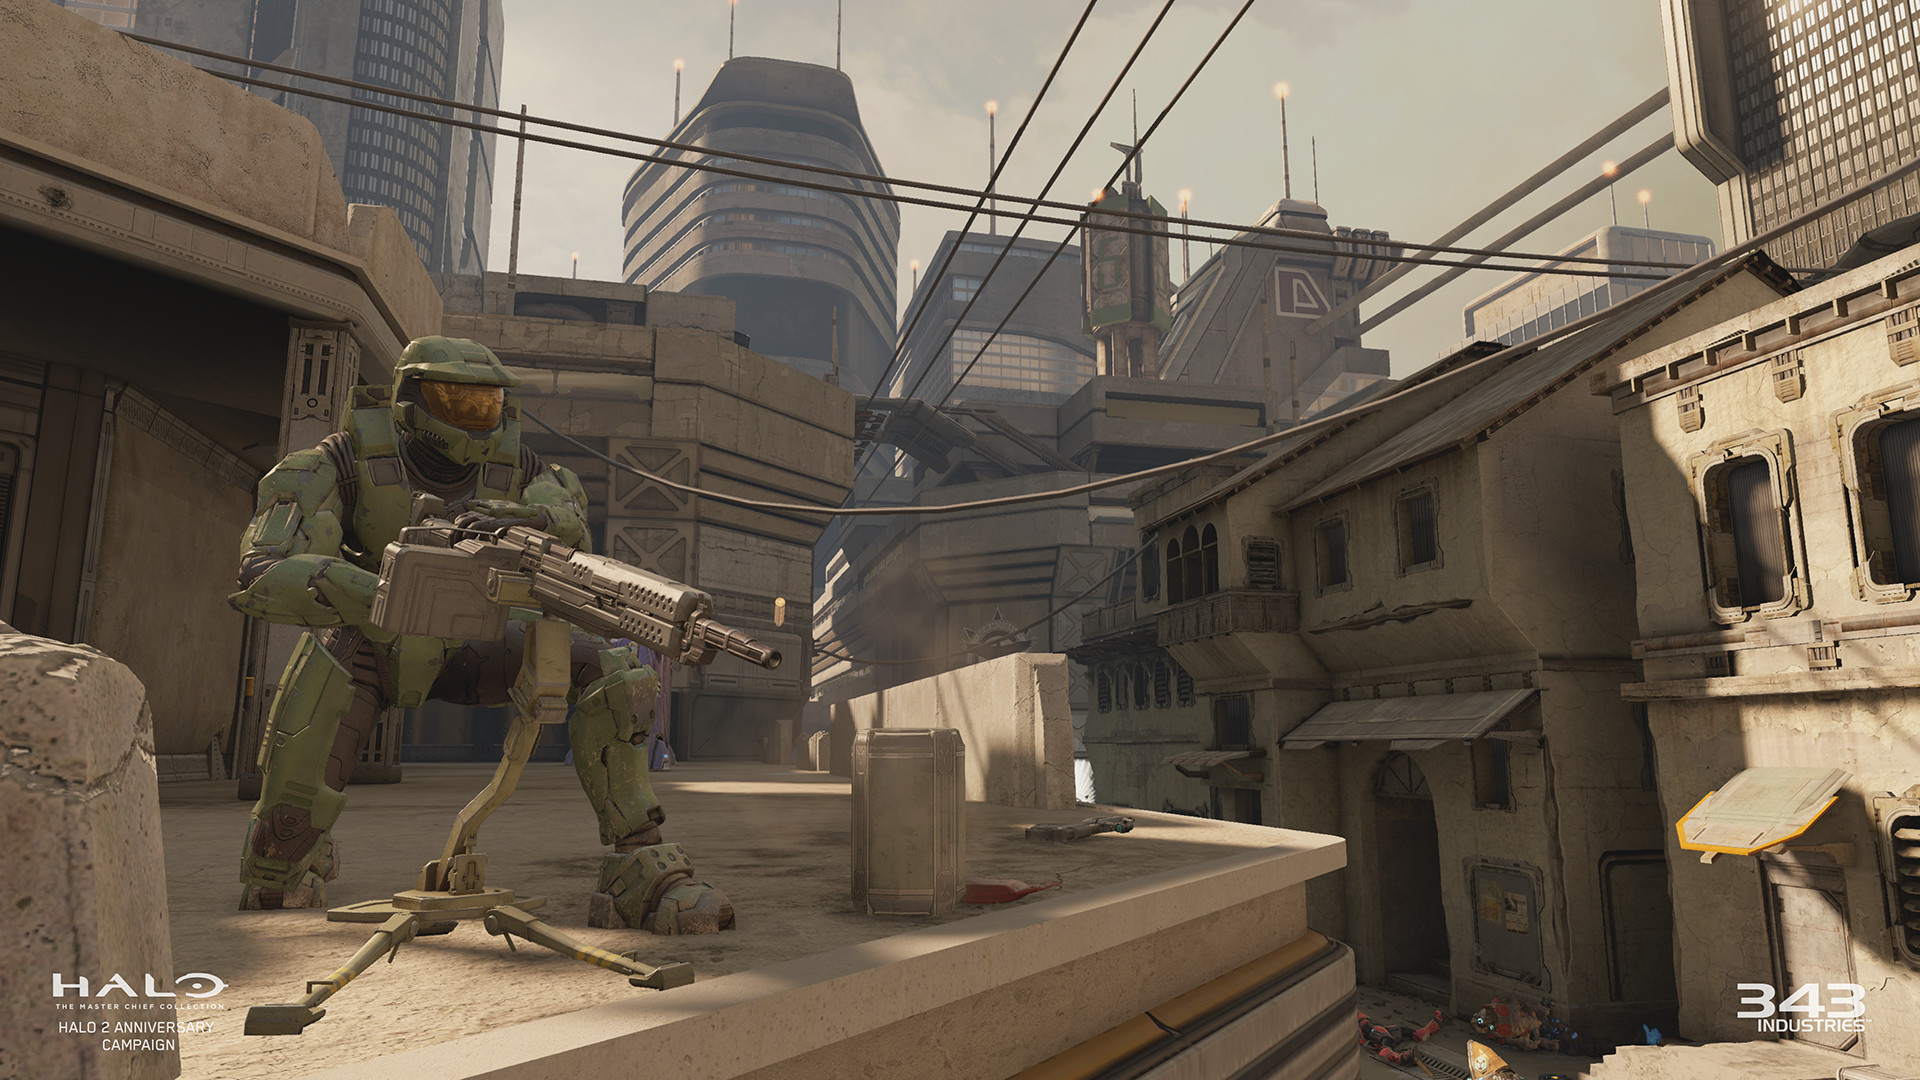 Halo: The Master Chief Collection - screenshot 4